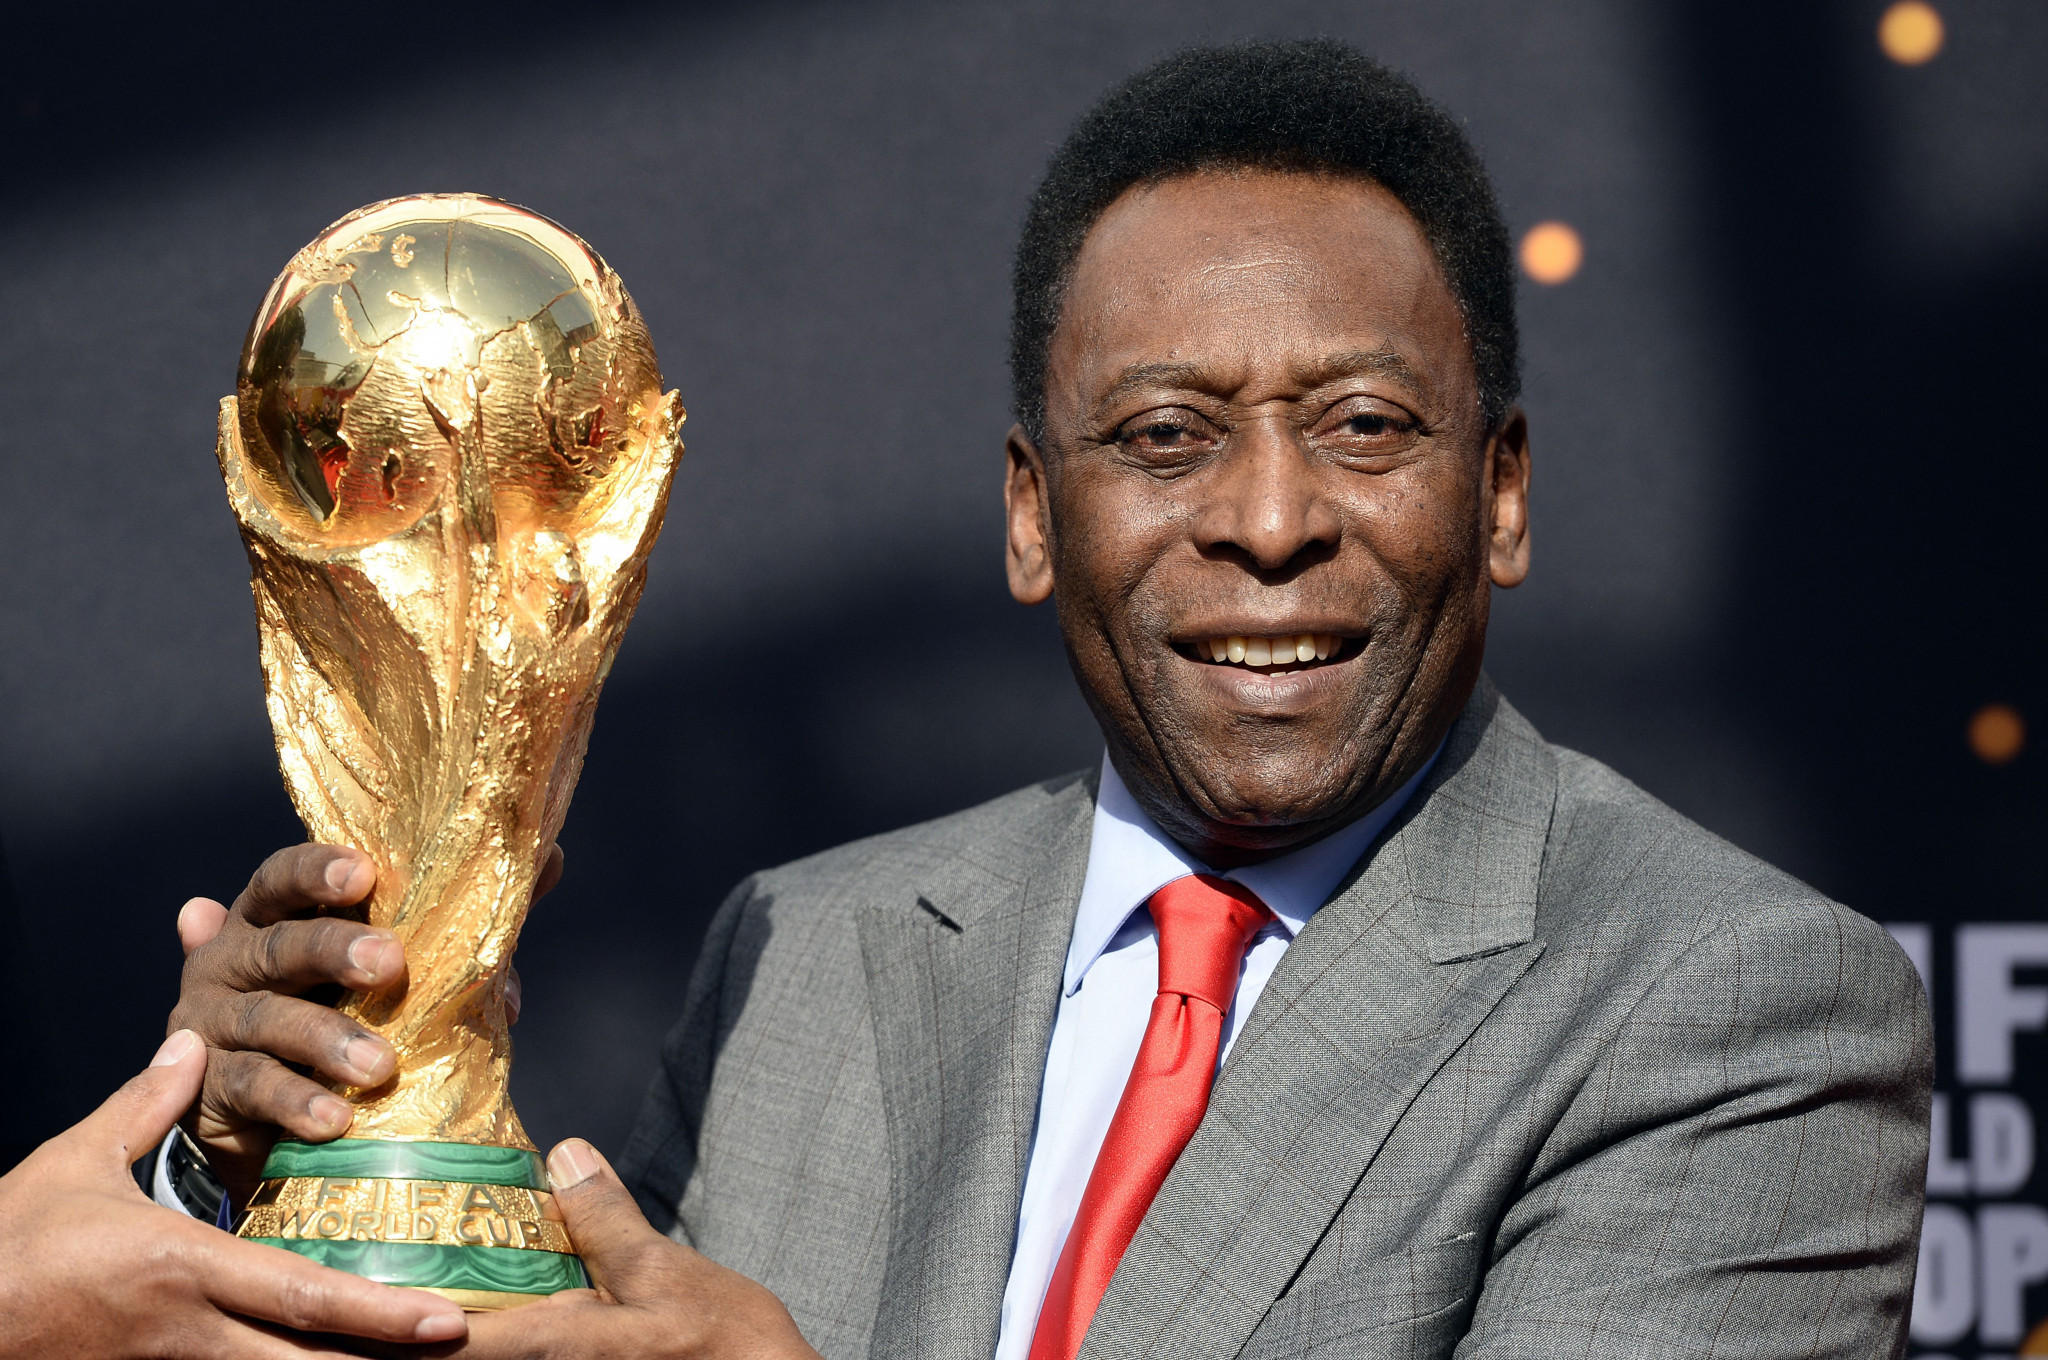 Pelé is regarded as one of football's greatest players ©Getty Images